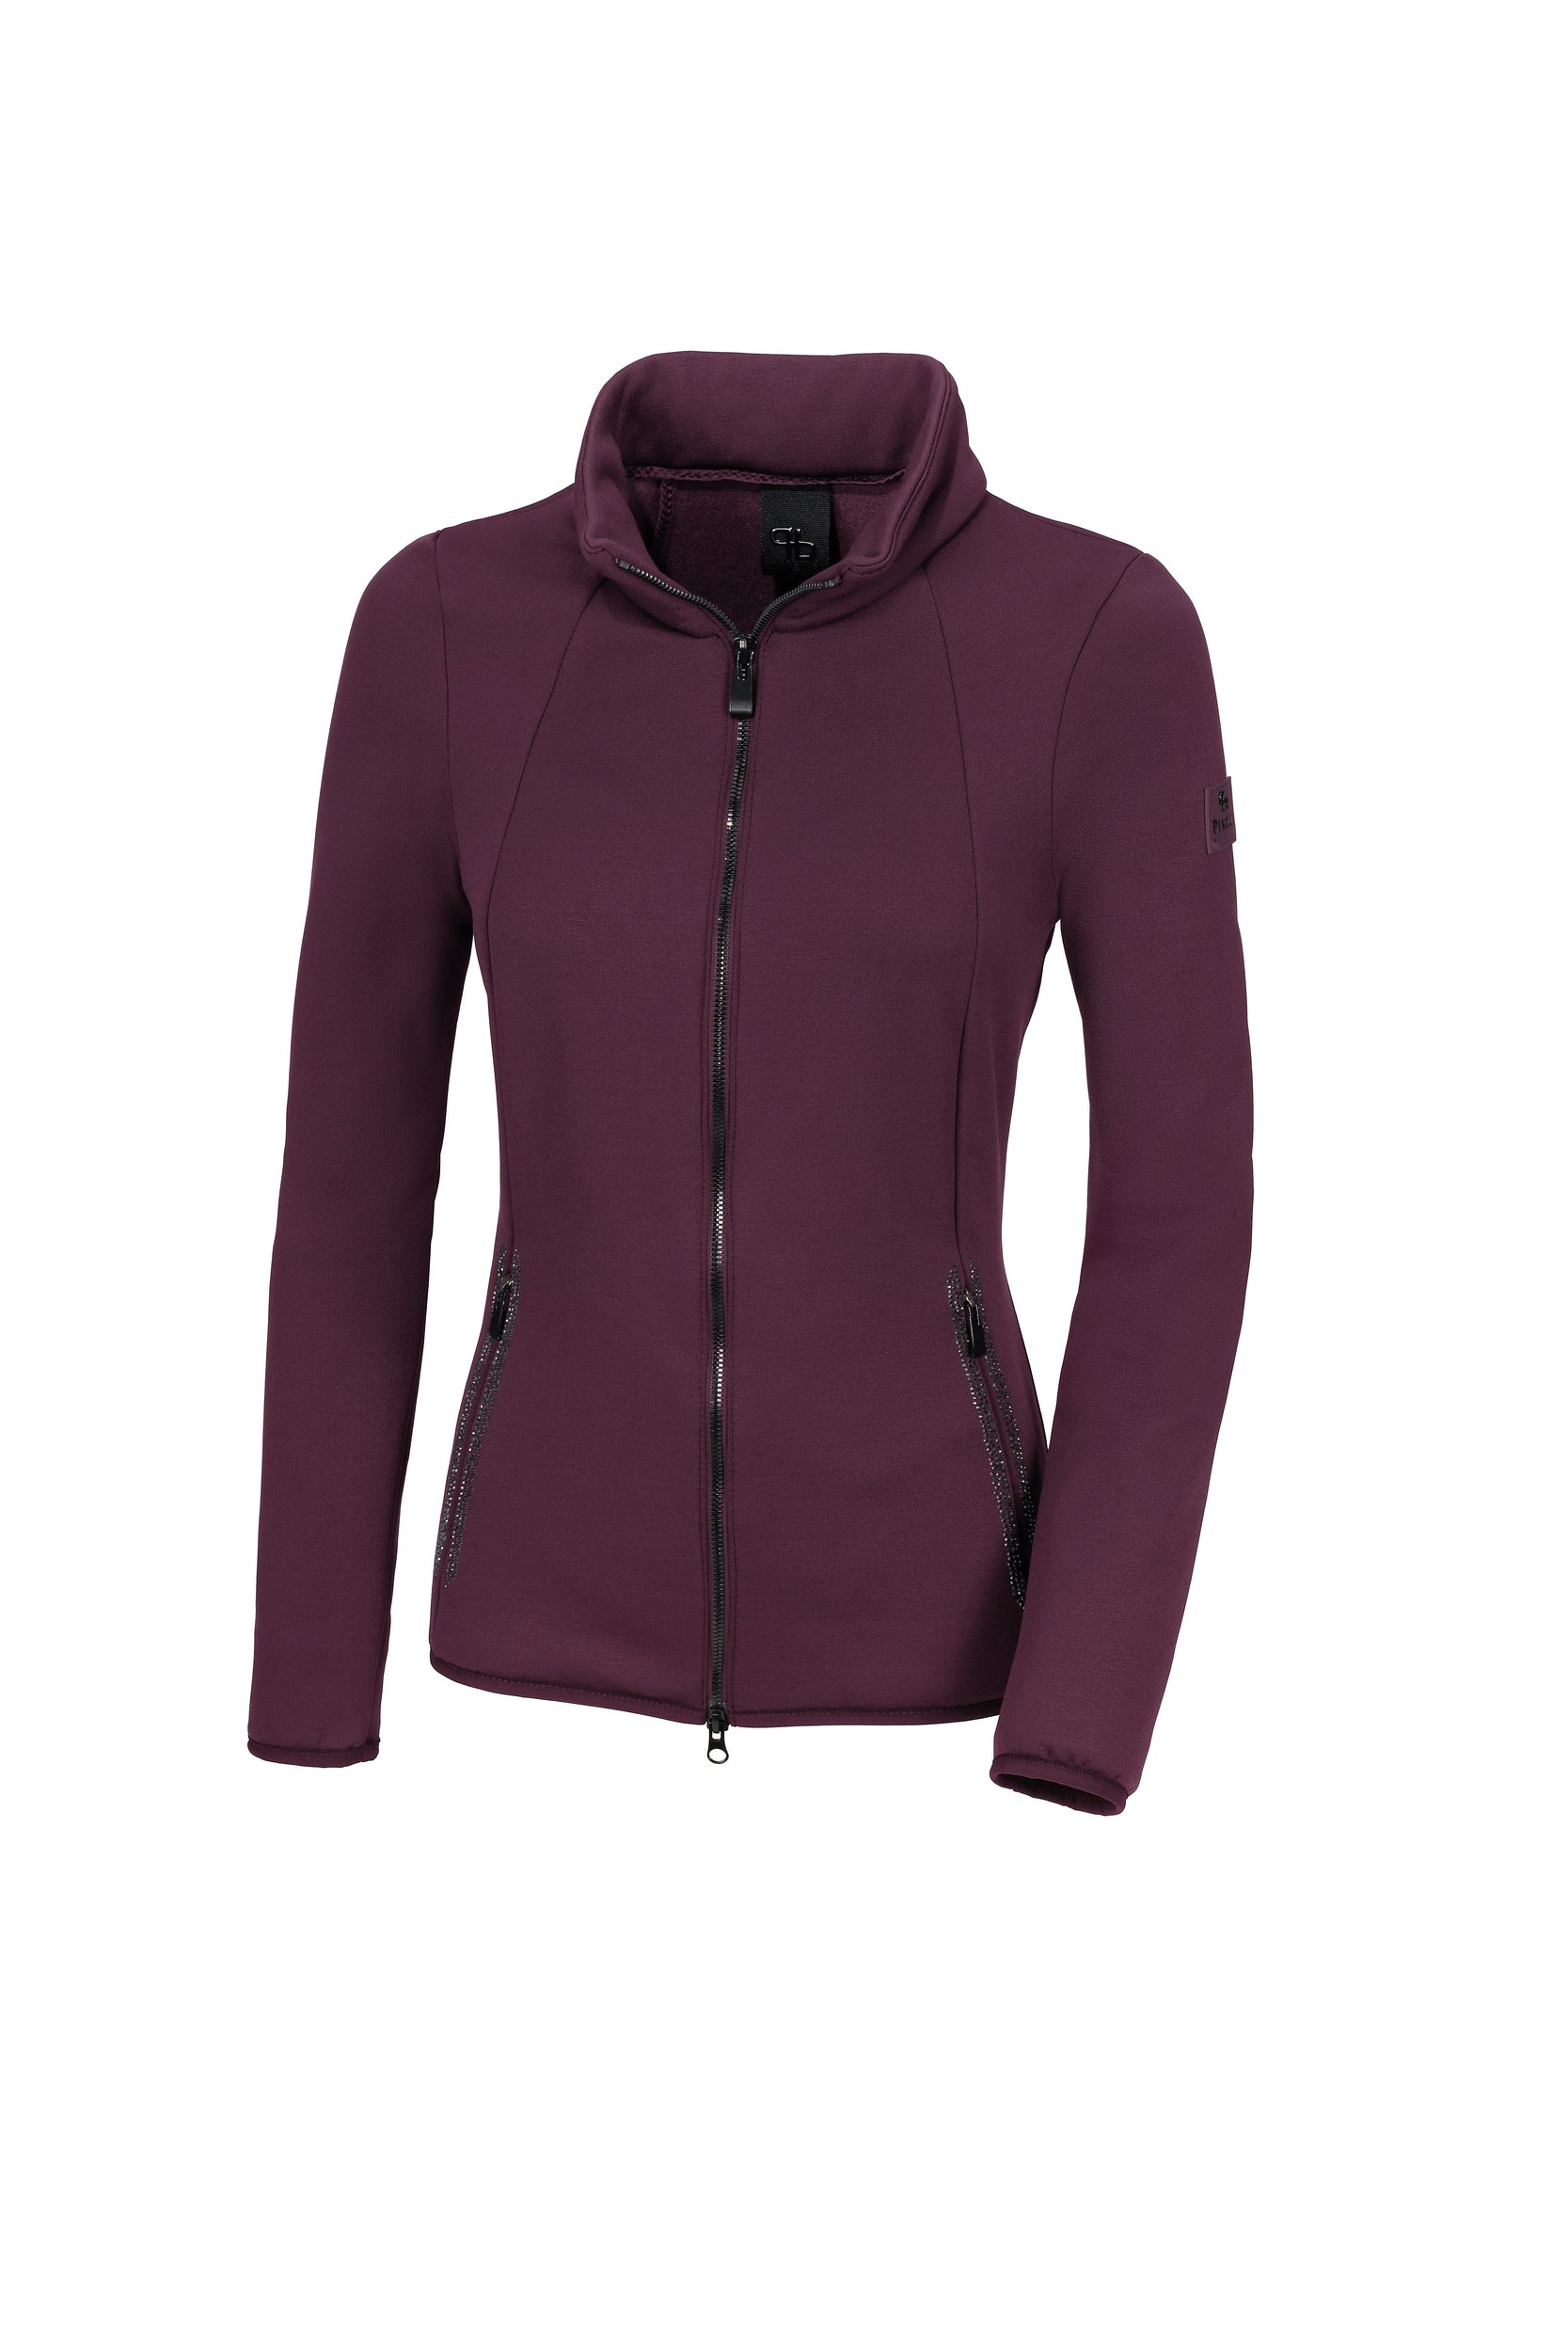 Pikeur sports Polartech jacket in Mulberry